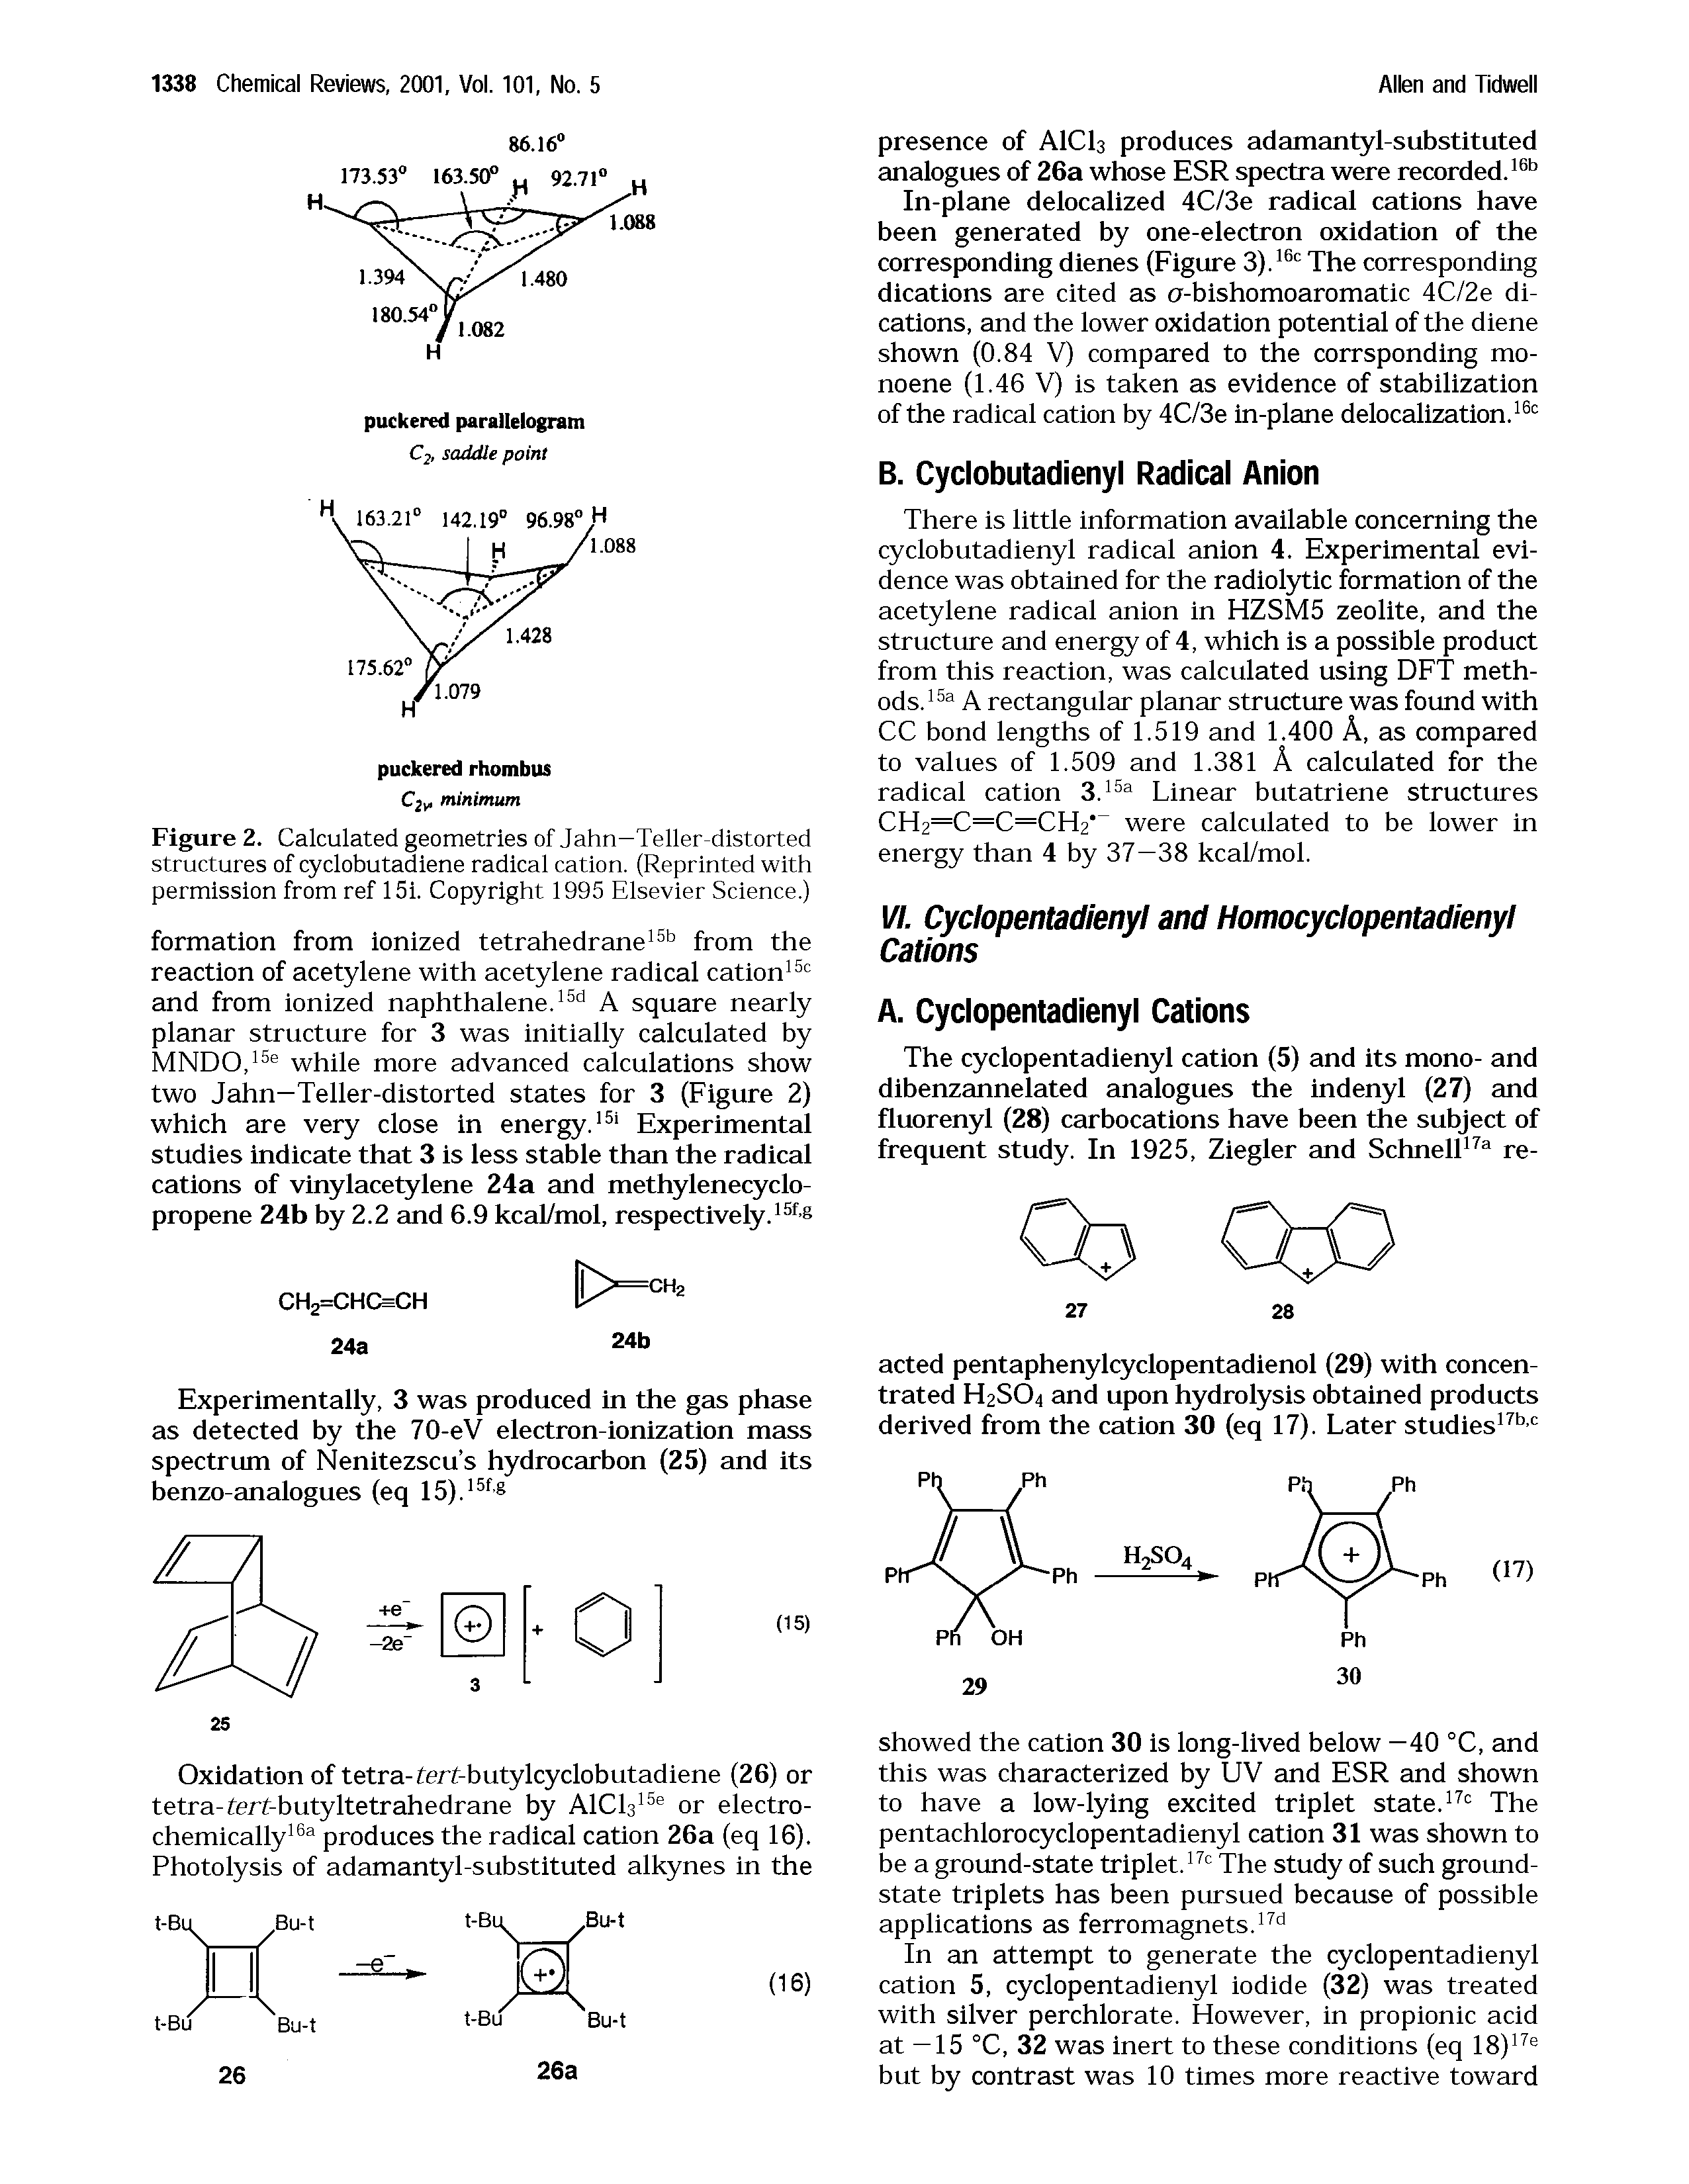 Figure 2. Calculated geometries of Jahn—Teller-distorted structures of cyclobutadiene radical cation. (Reprinted with permission from ref 15i. Copyright 1995 Elsevier Science.)...